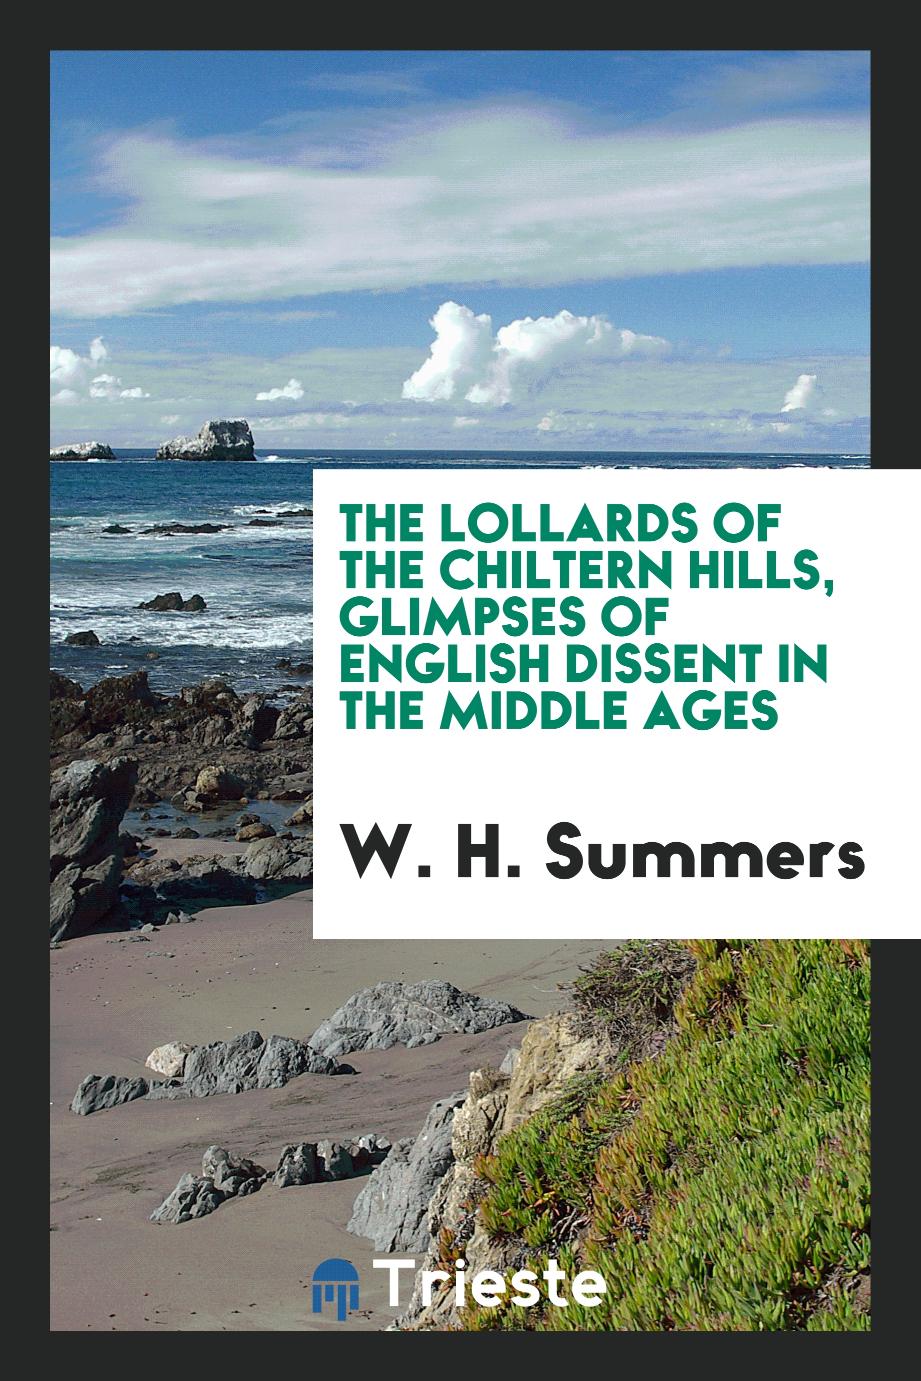 The Lollards of the Chiltern Hills, glimpses of English dissent in the Middle Ages